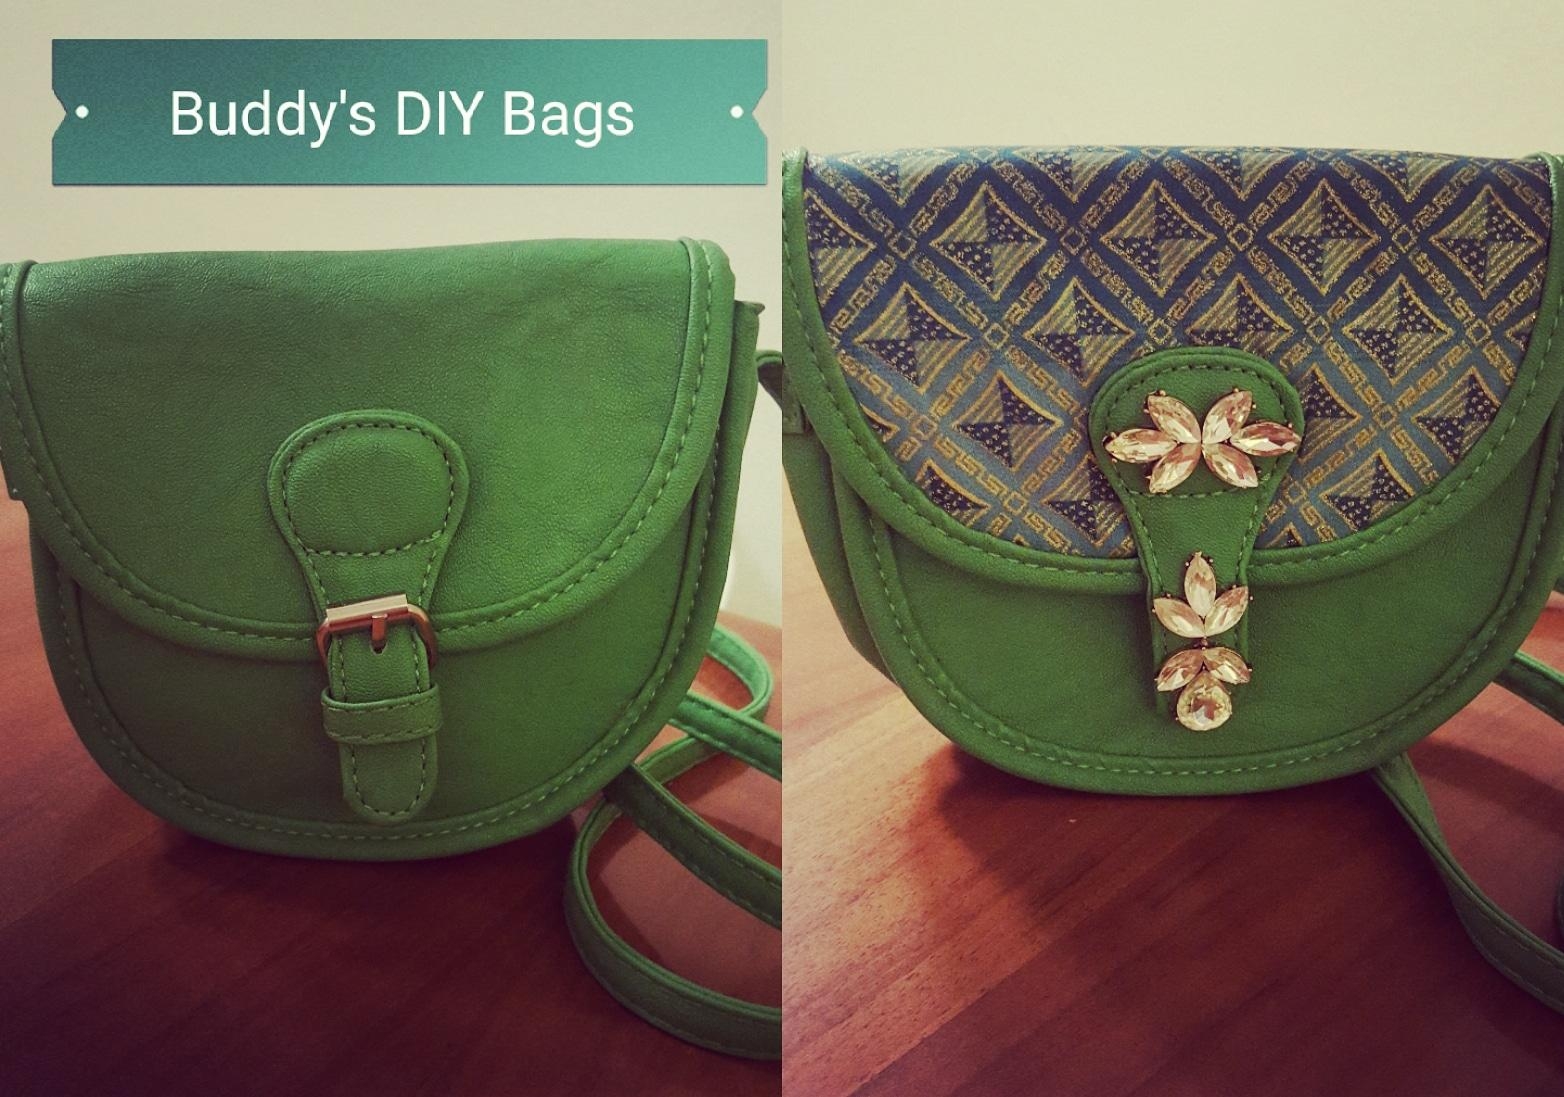 My bags make-over♡
#buddysdiybags #green #africantouch 
#I♡bags